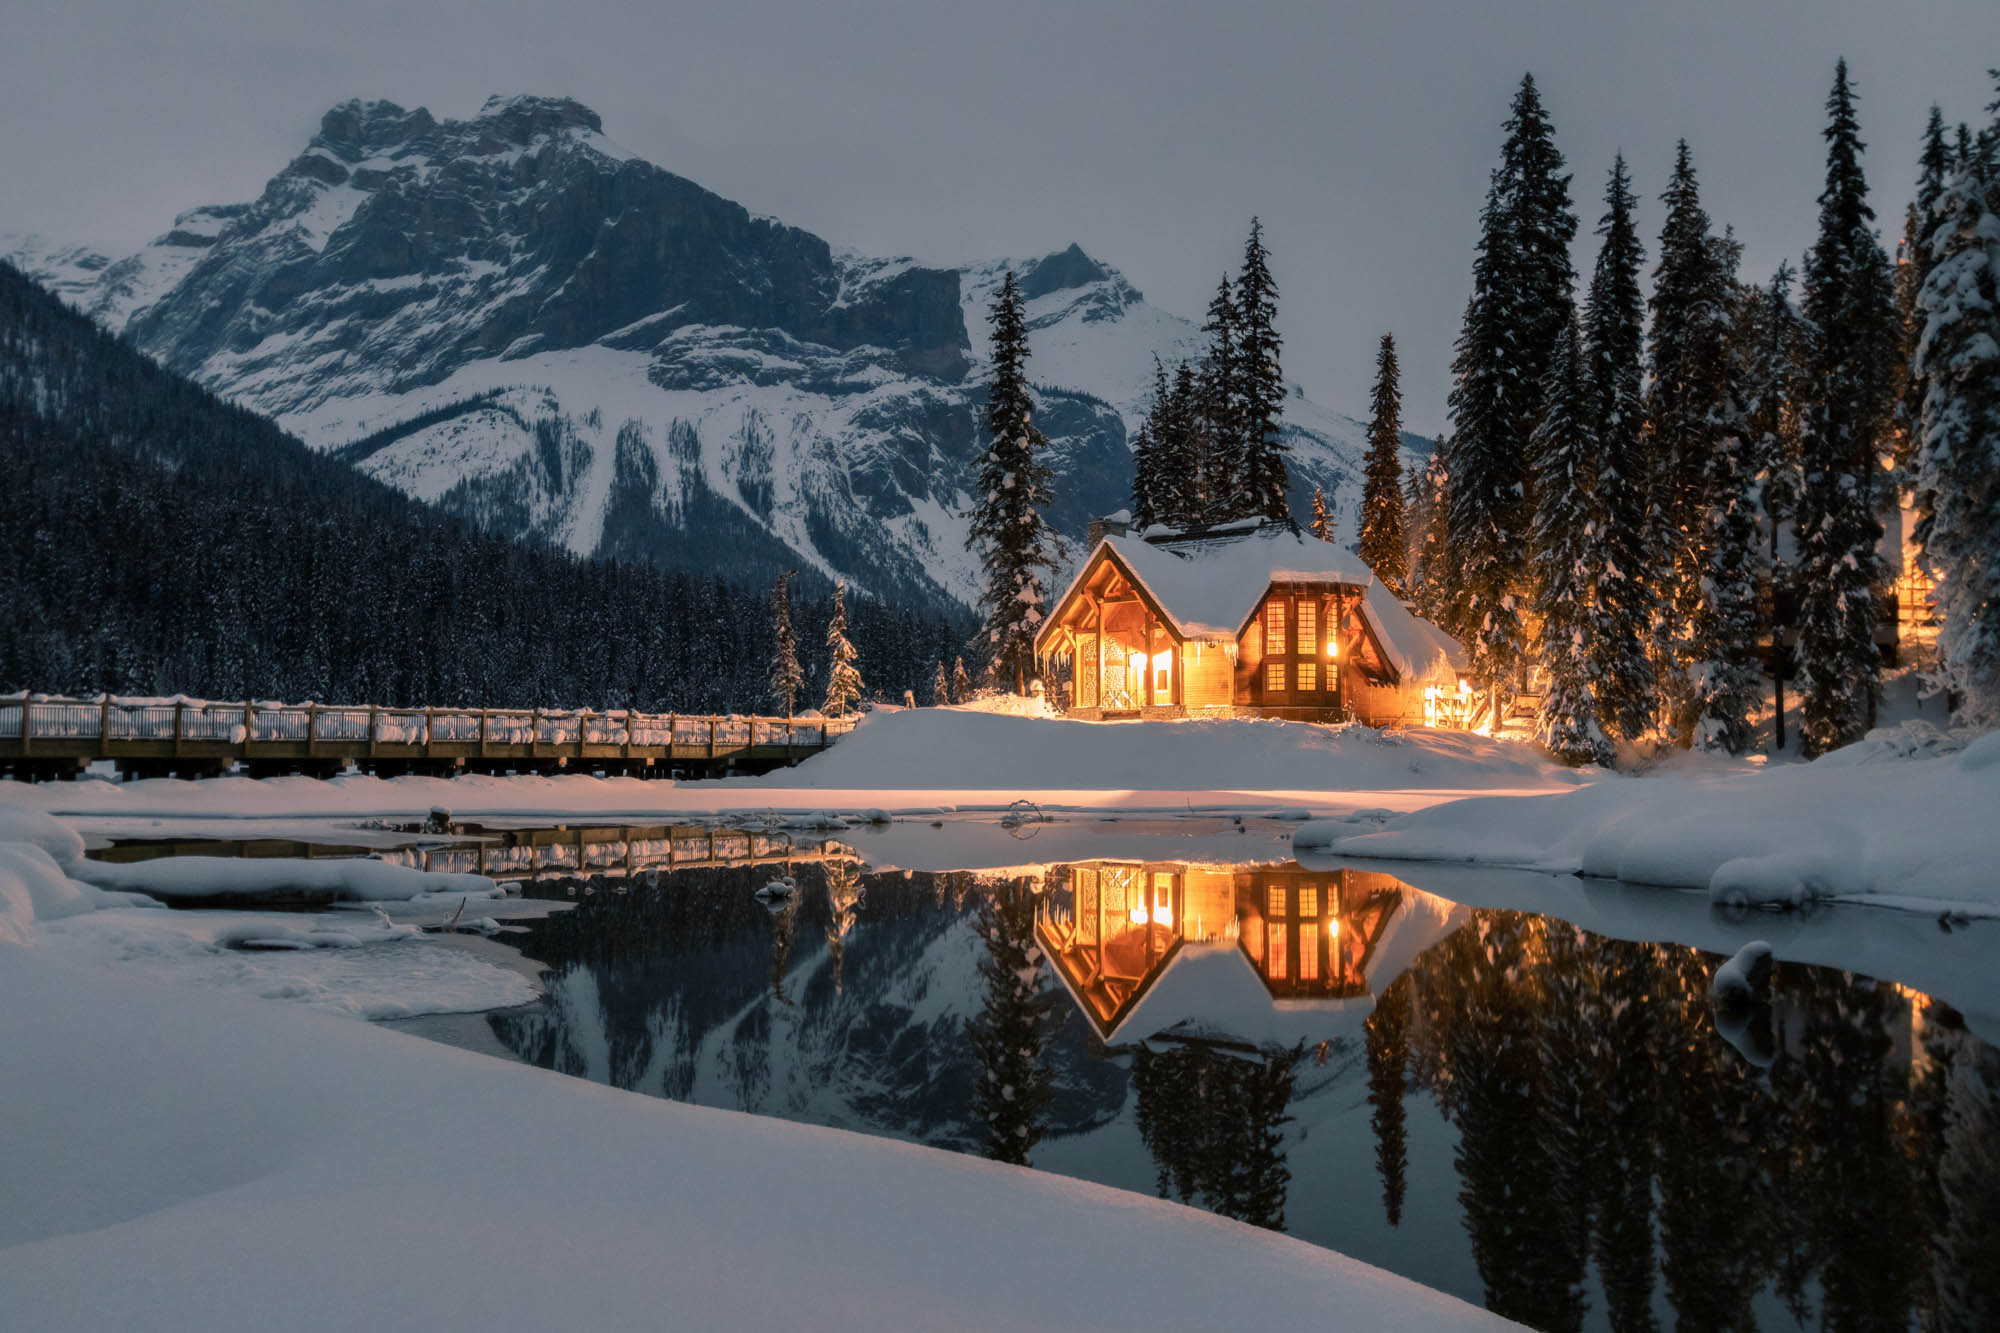 9 Winter Lodges That Are Both Cozy and Majestic - Samantha Brown